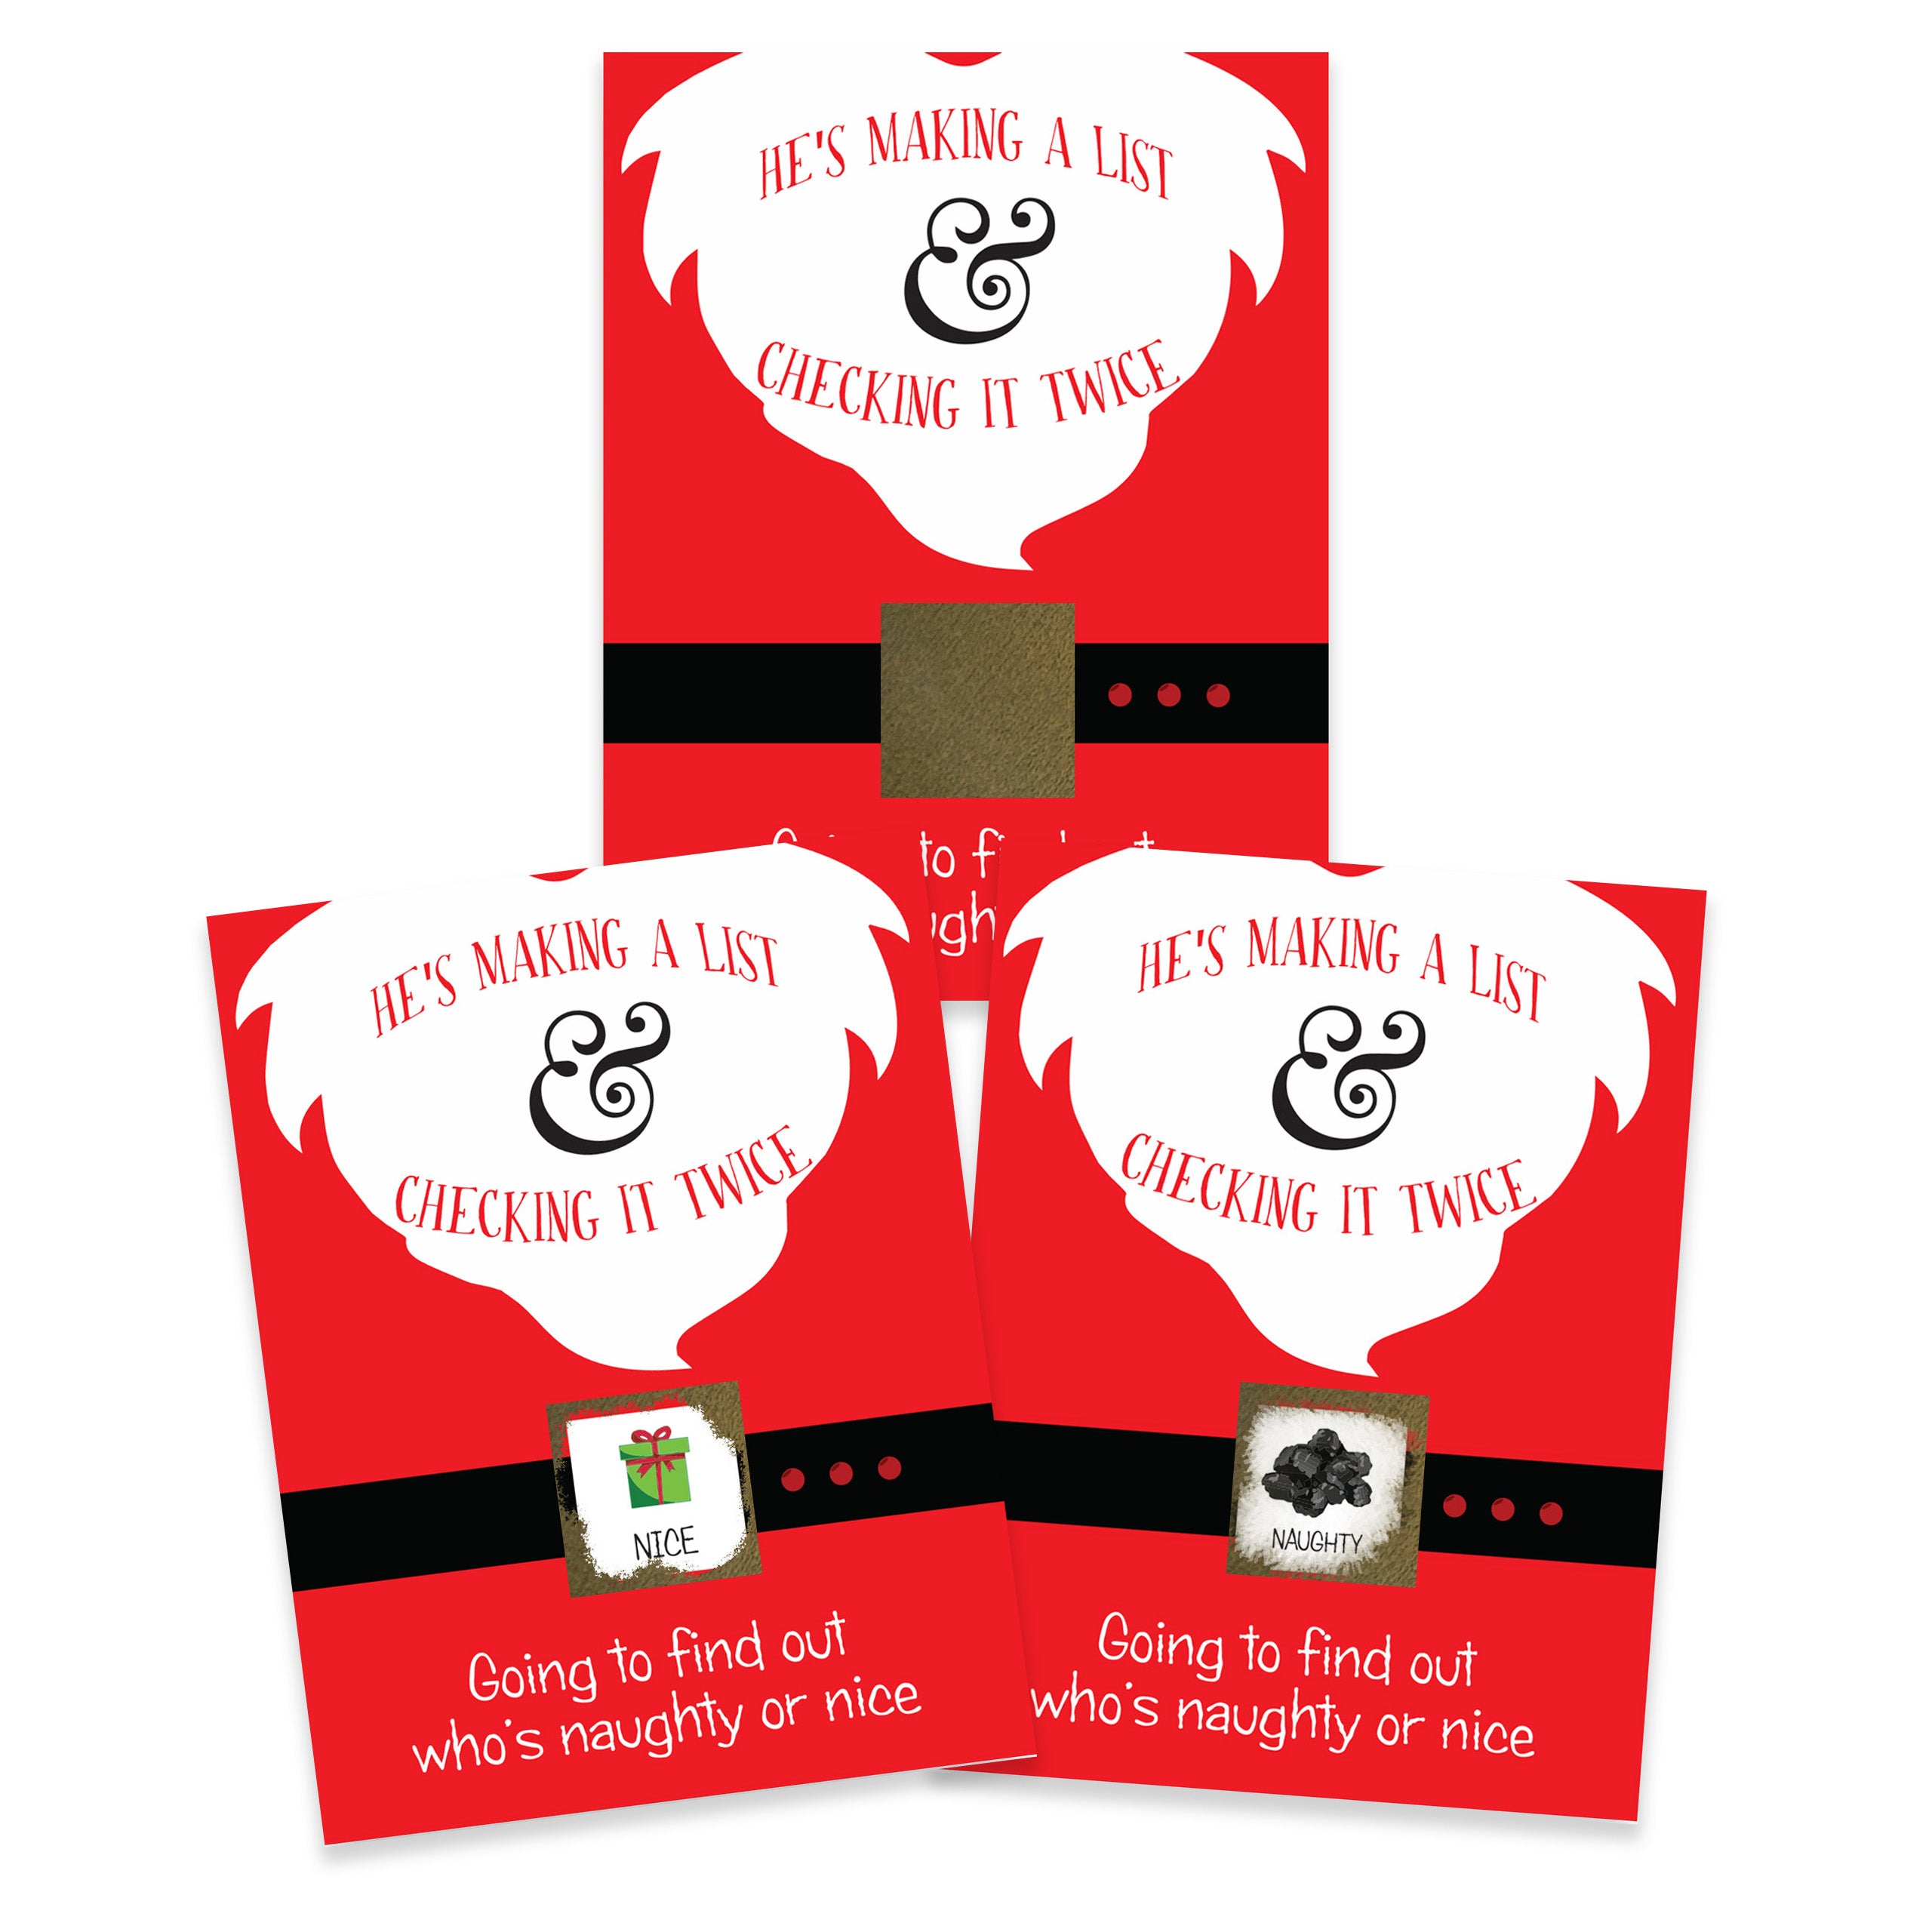 Santa Naughty or Nice Scratch Off Game Cards 26 Pack - 2 "Nice" Winning and 24 "Naughty" Non-Winning Cards - My Scratch Offs